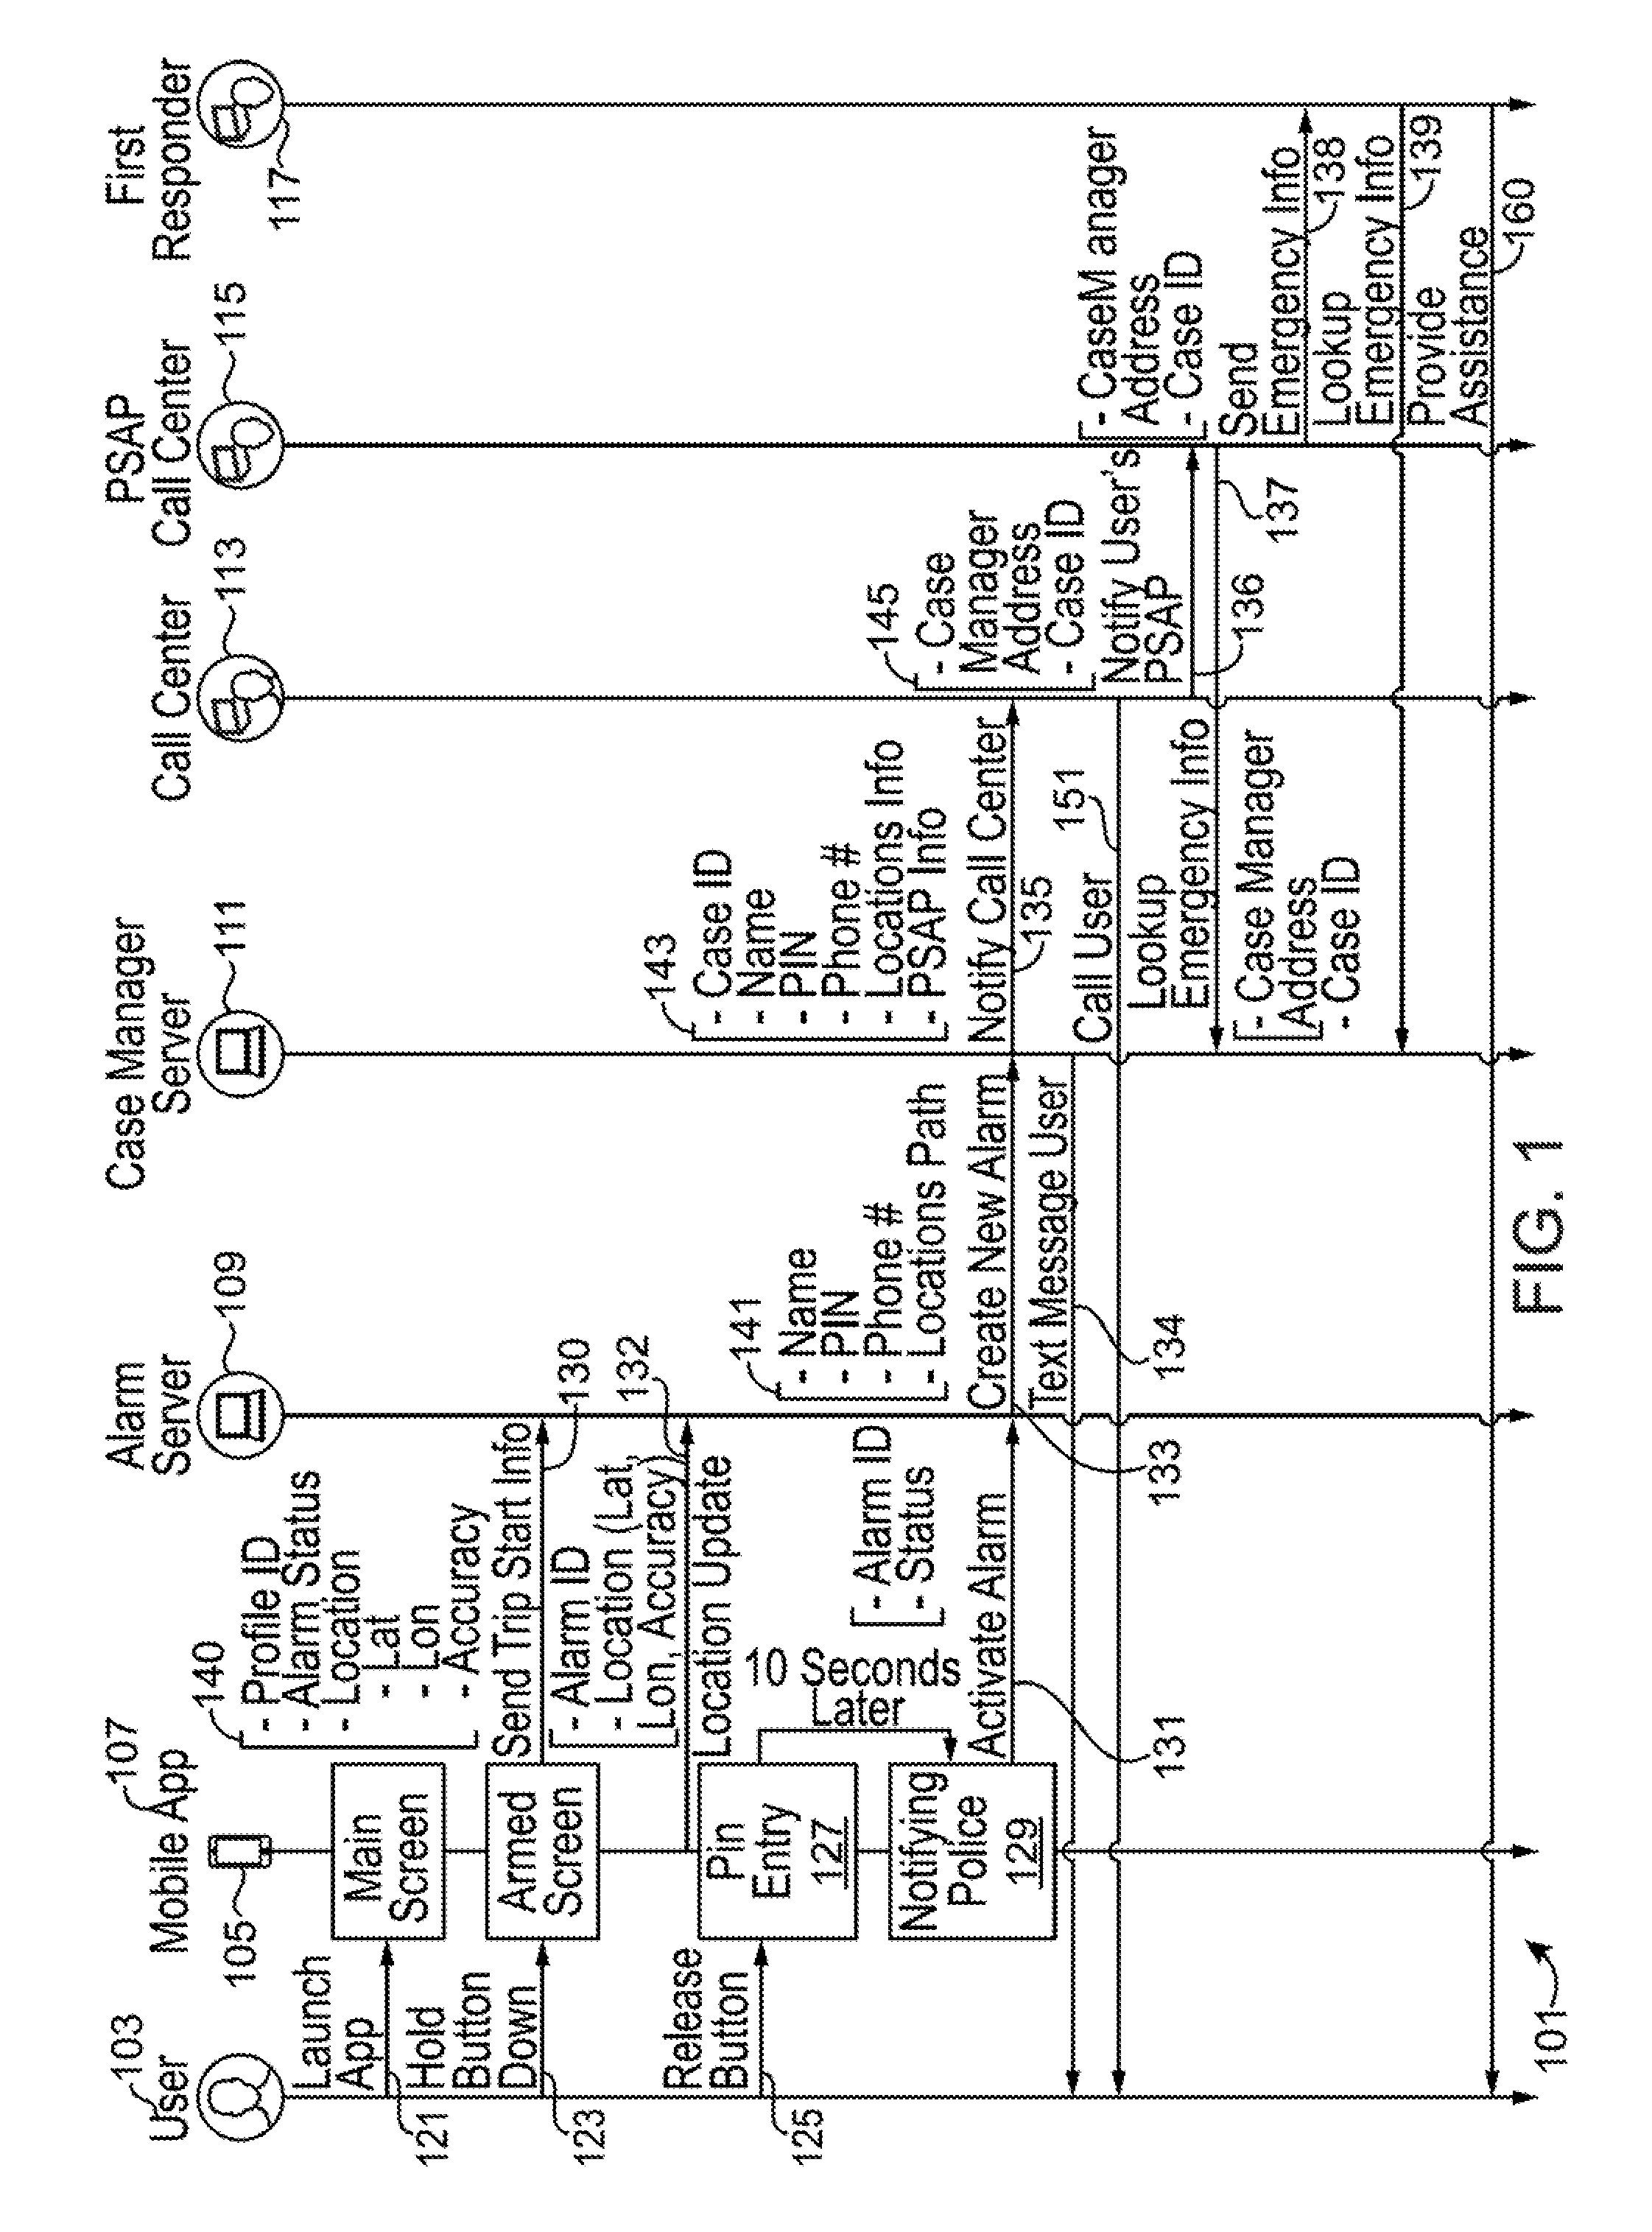 Systems and methods for providing assistance in an emergency